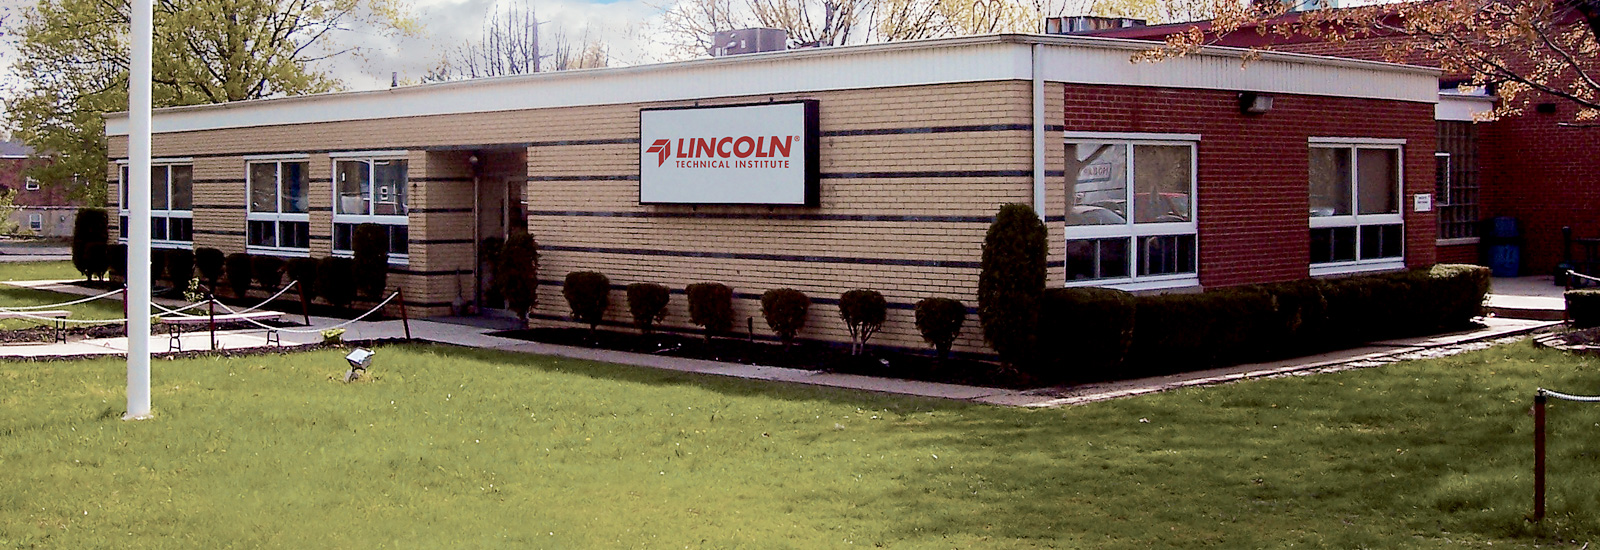 lincoln tech allentown phone number